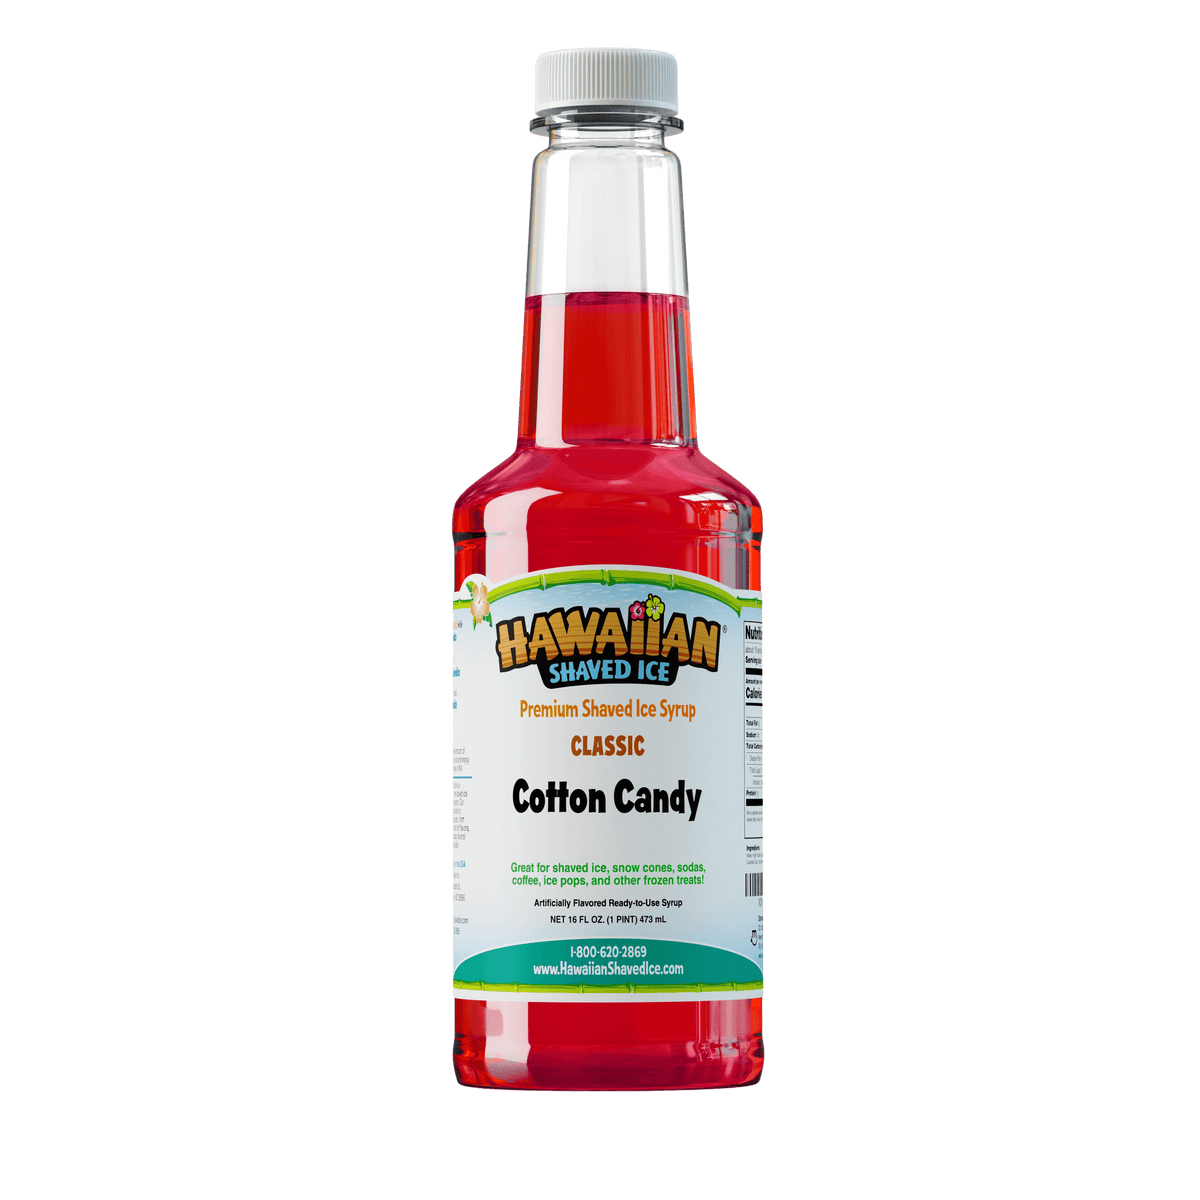 A pint (16-oz) of Hawaiian Shaved Ice Cotton Candy Flavored syrup, Red